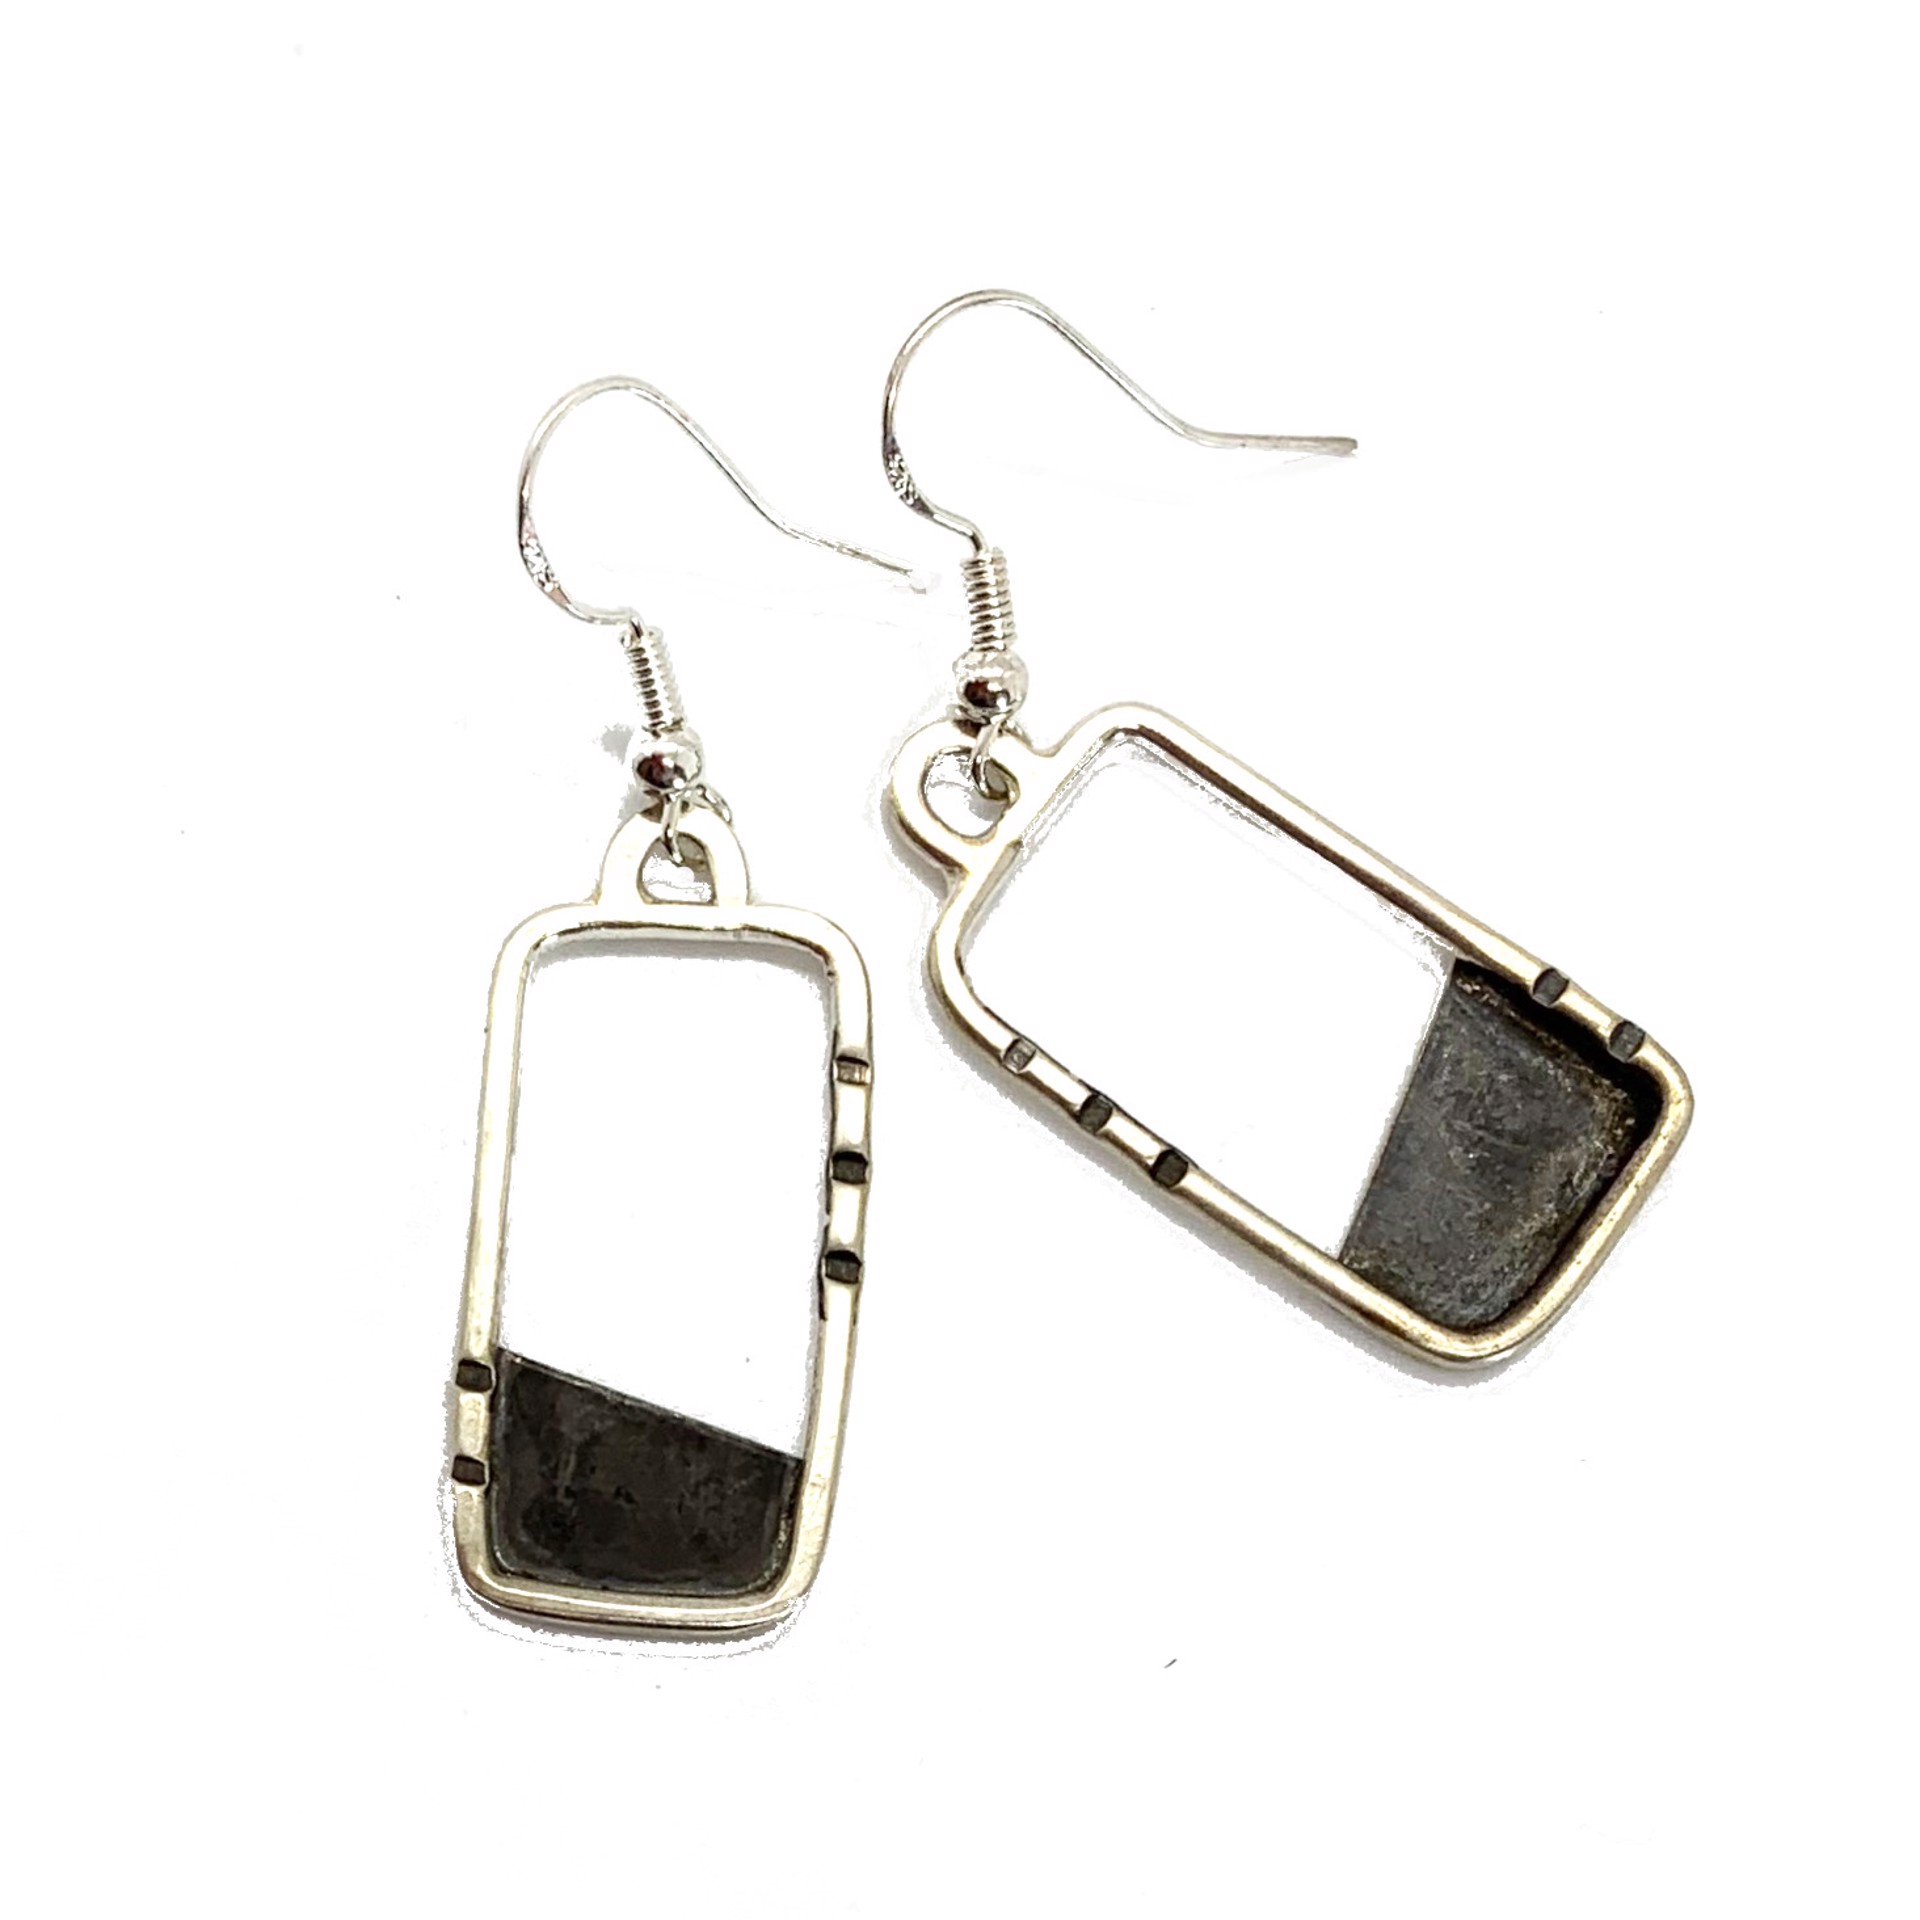 Rectangular Sterling Silver Earrings with Oxidized Piece by Leslie Eggers